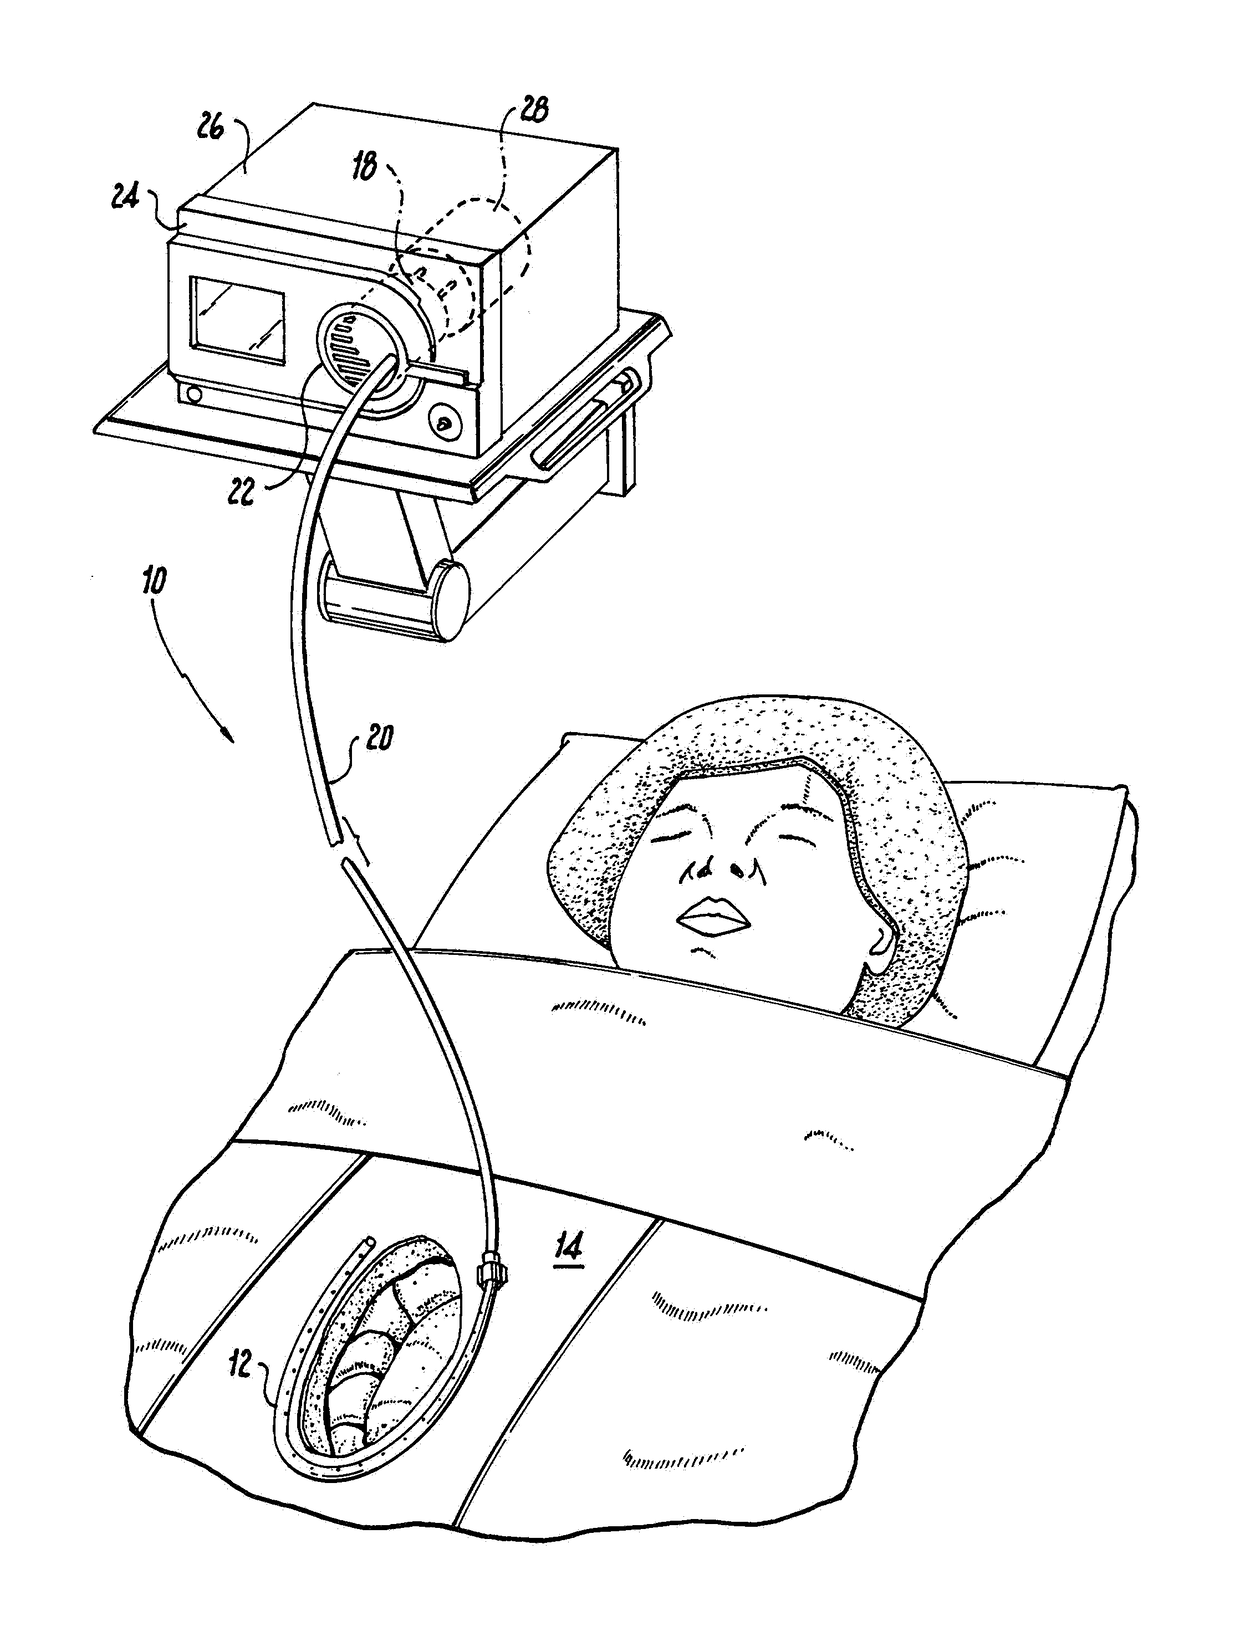 Smoke evacuation system for invasive surgical procedures